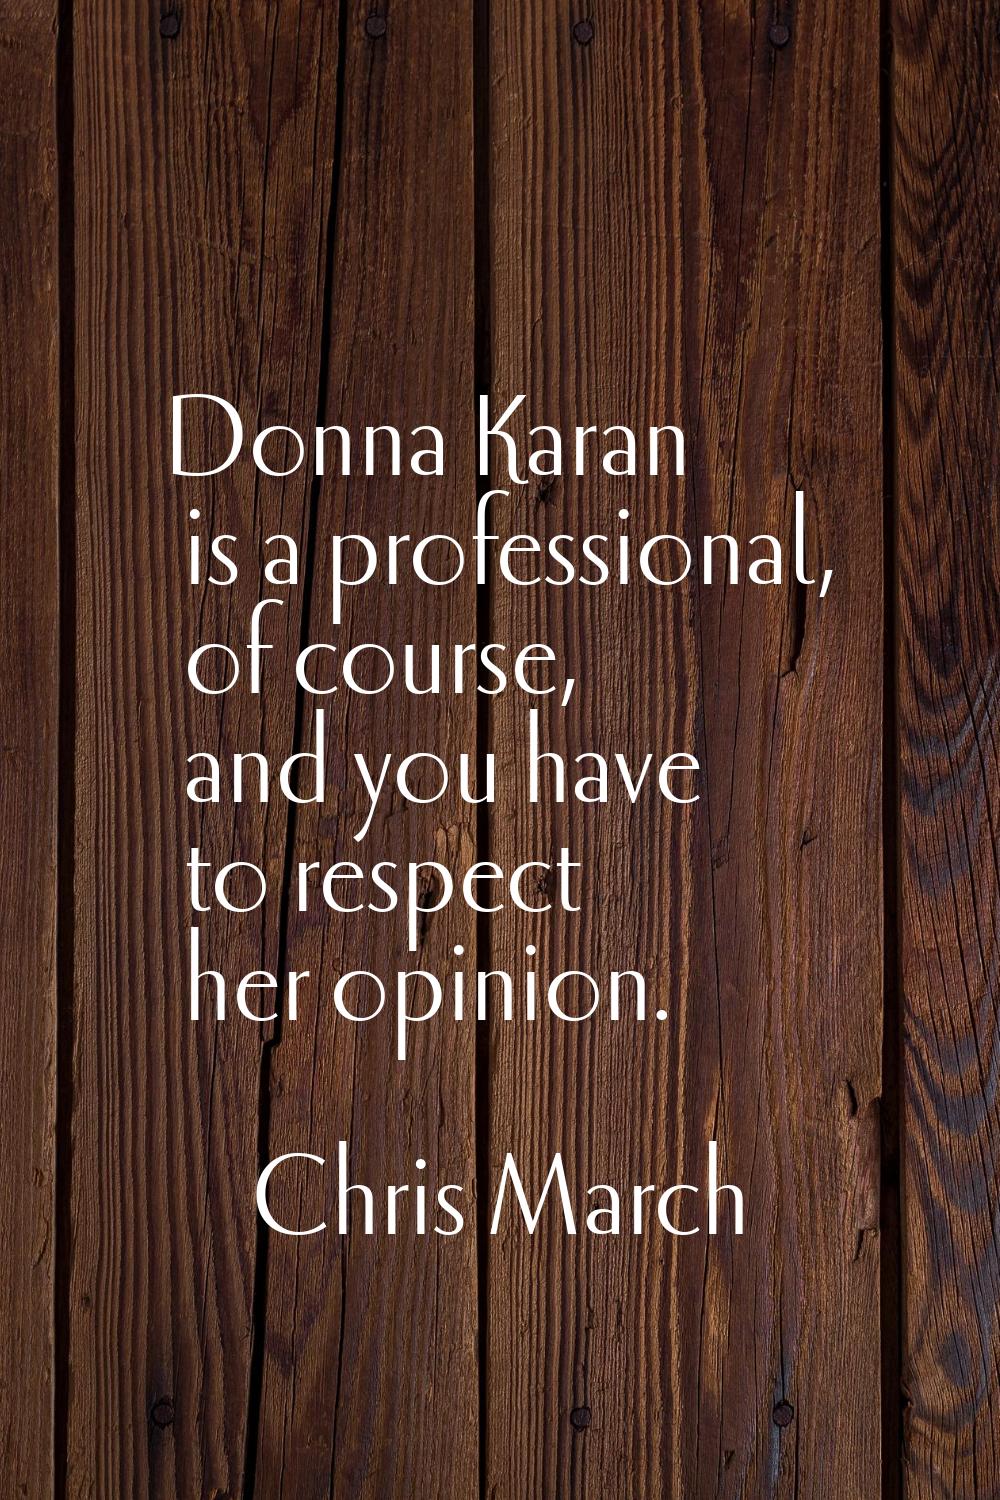 Donna Karan is a professional, of course, and you have to respect her opinion.